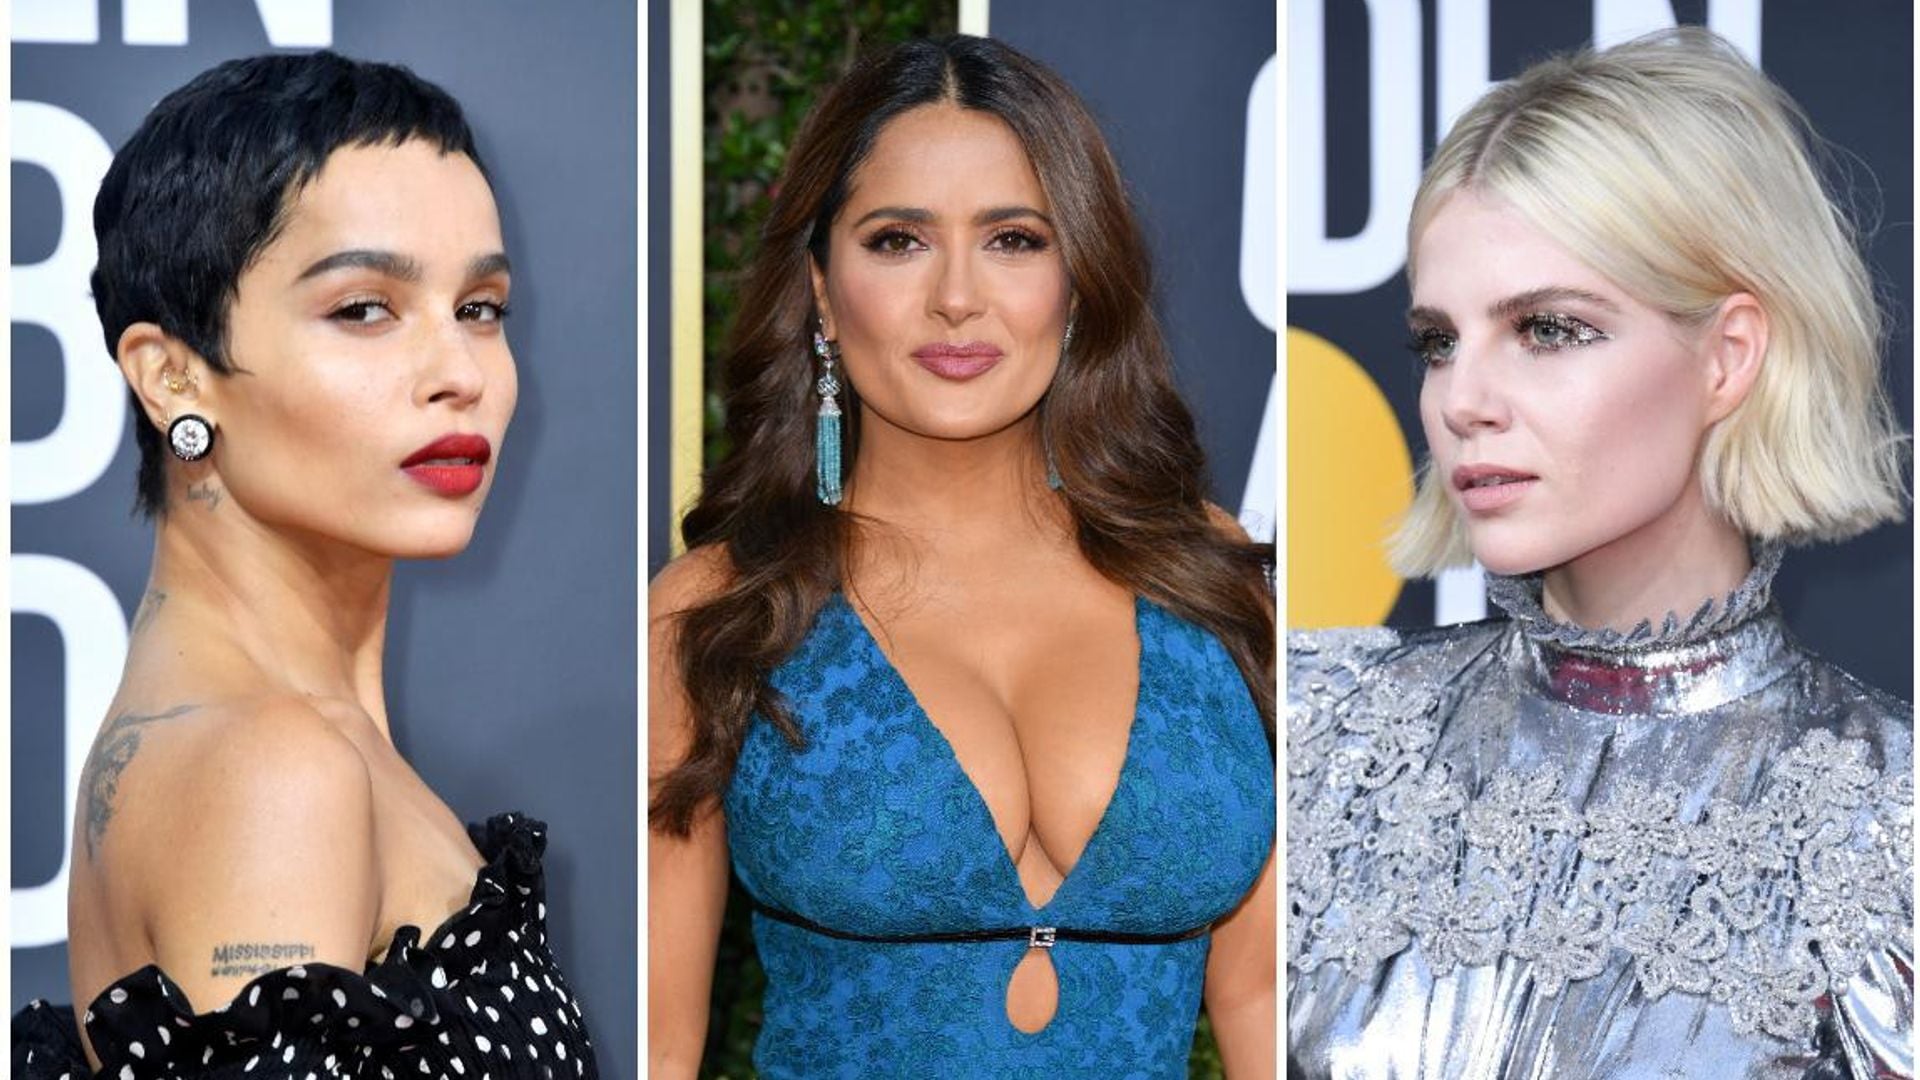 Salma Hayek, Zoe Kravitz and more top makeup and hair moments from the Golden Globes 2020